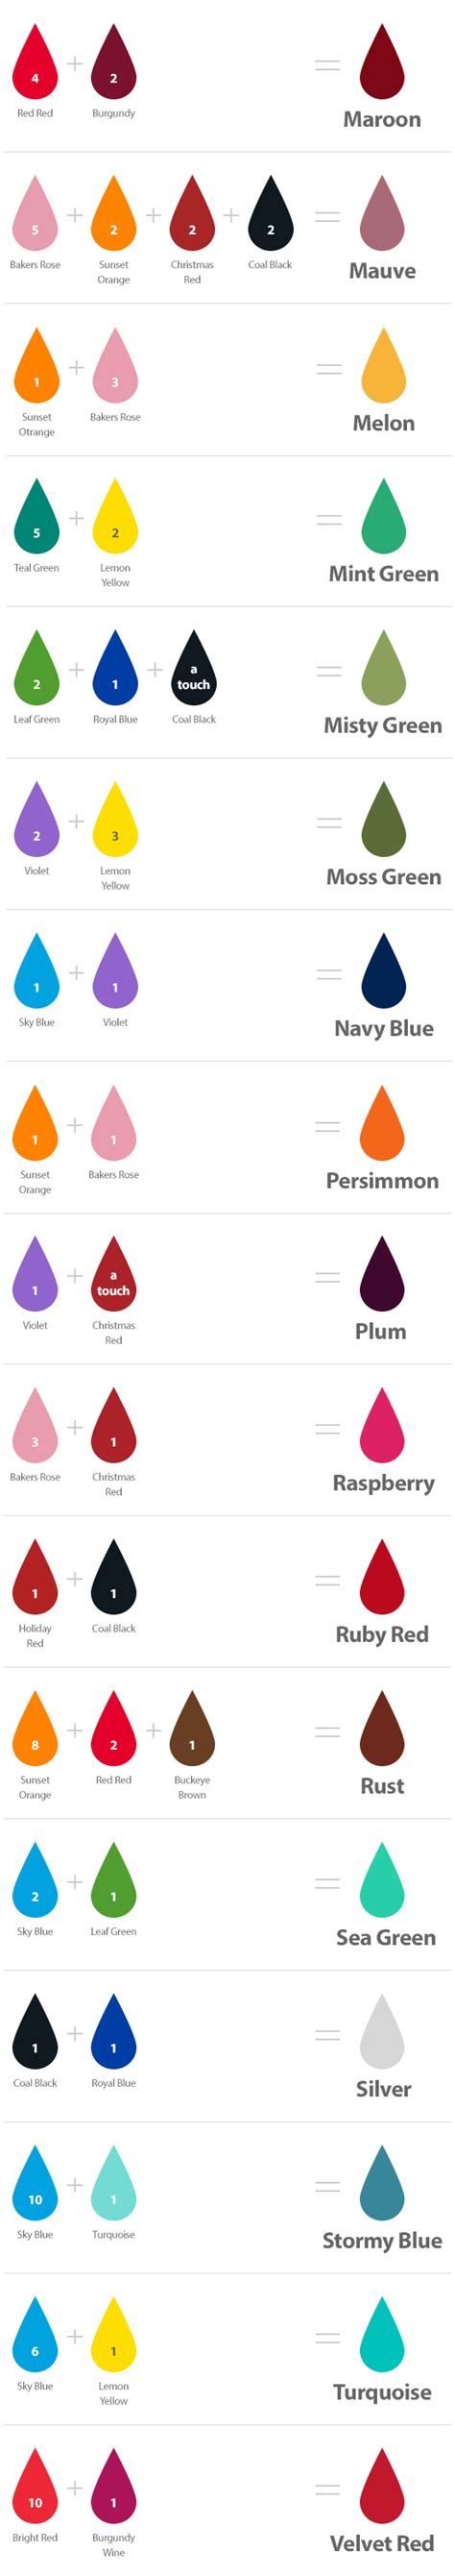 Chefmaster Blog Color Mixing Guide For Food Coloring